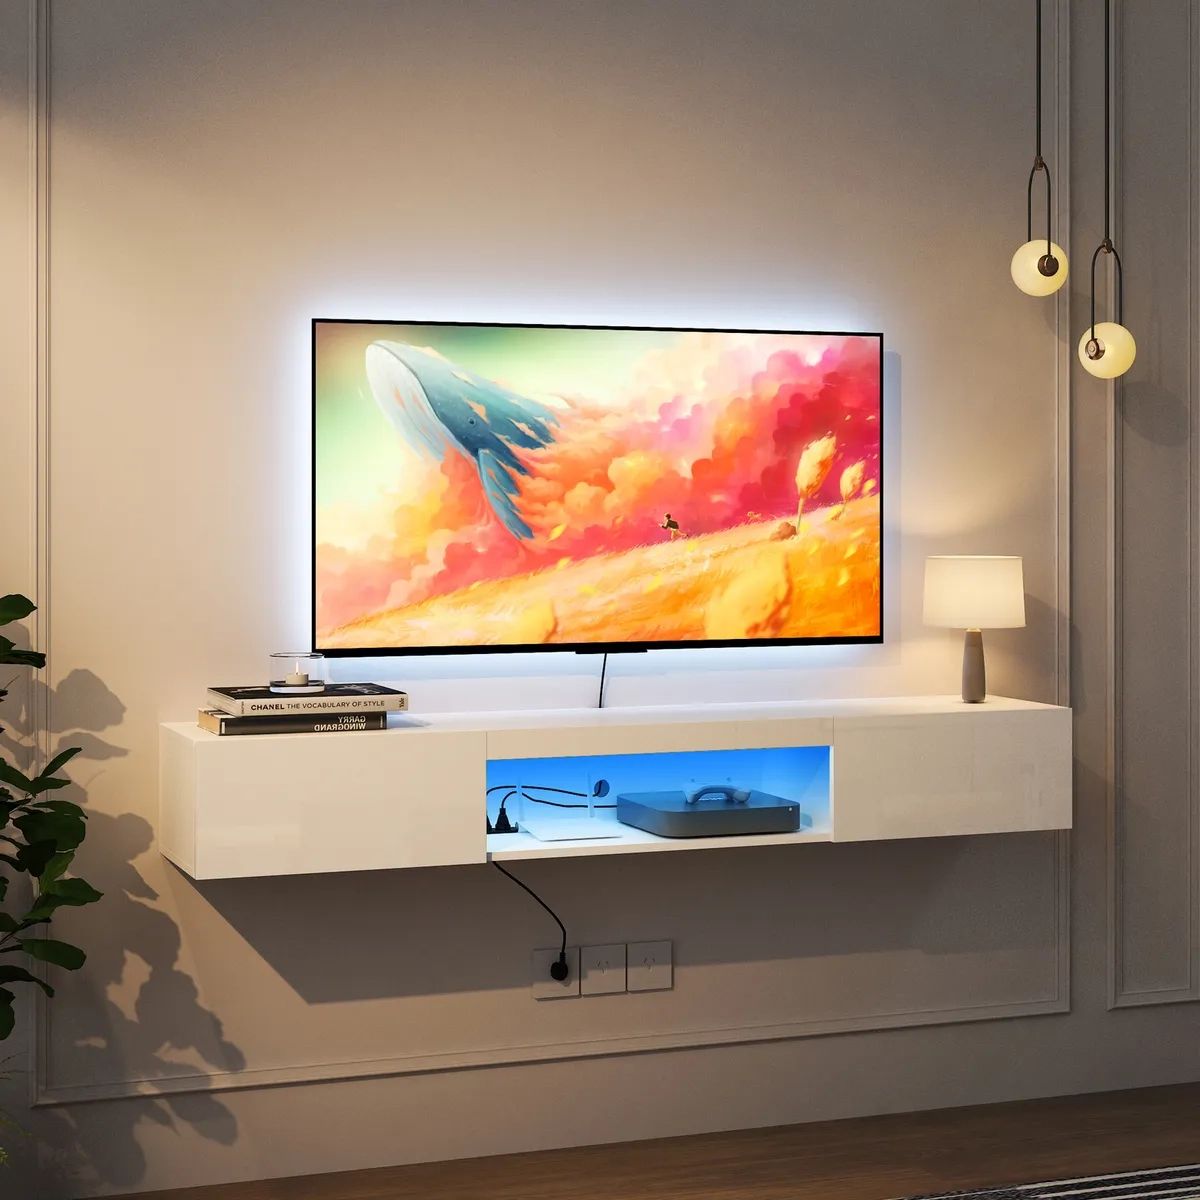 Floating Tv Stand With Led Lights & Power Outlets Wall Mounted For Tvs  Up To 65" | Ebay Inside Tv Stands With Led Lights &amp; Power Outlet (View 8 of 15)